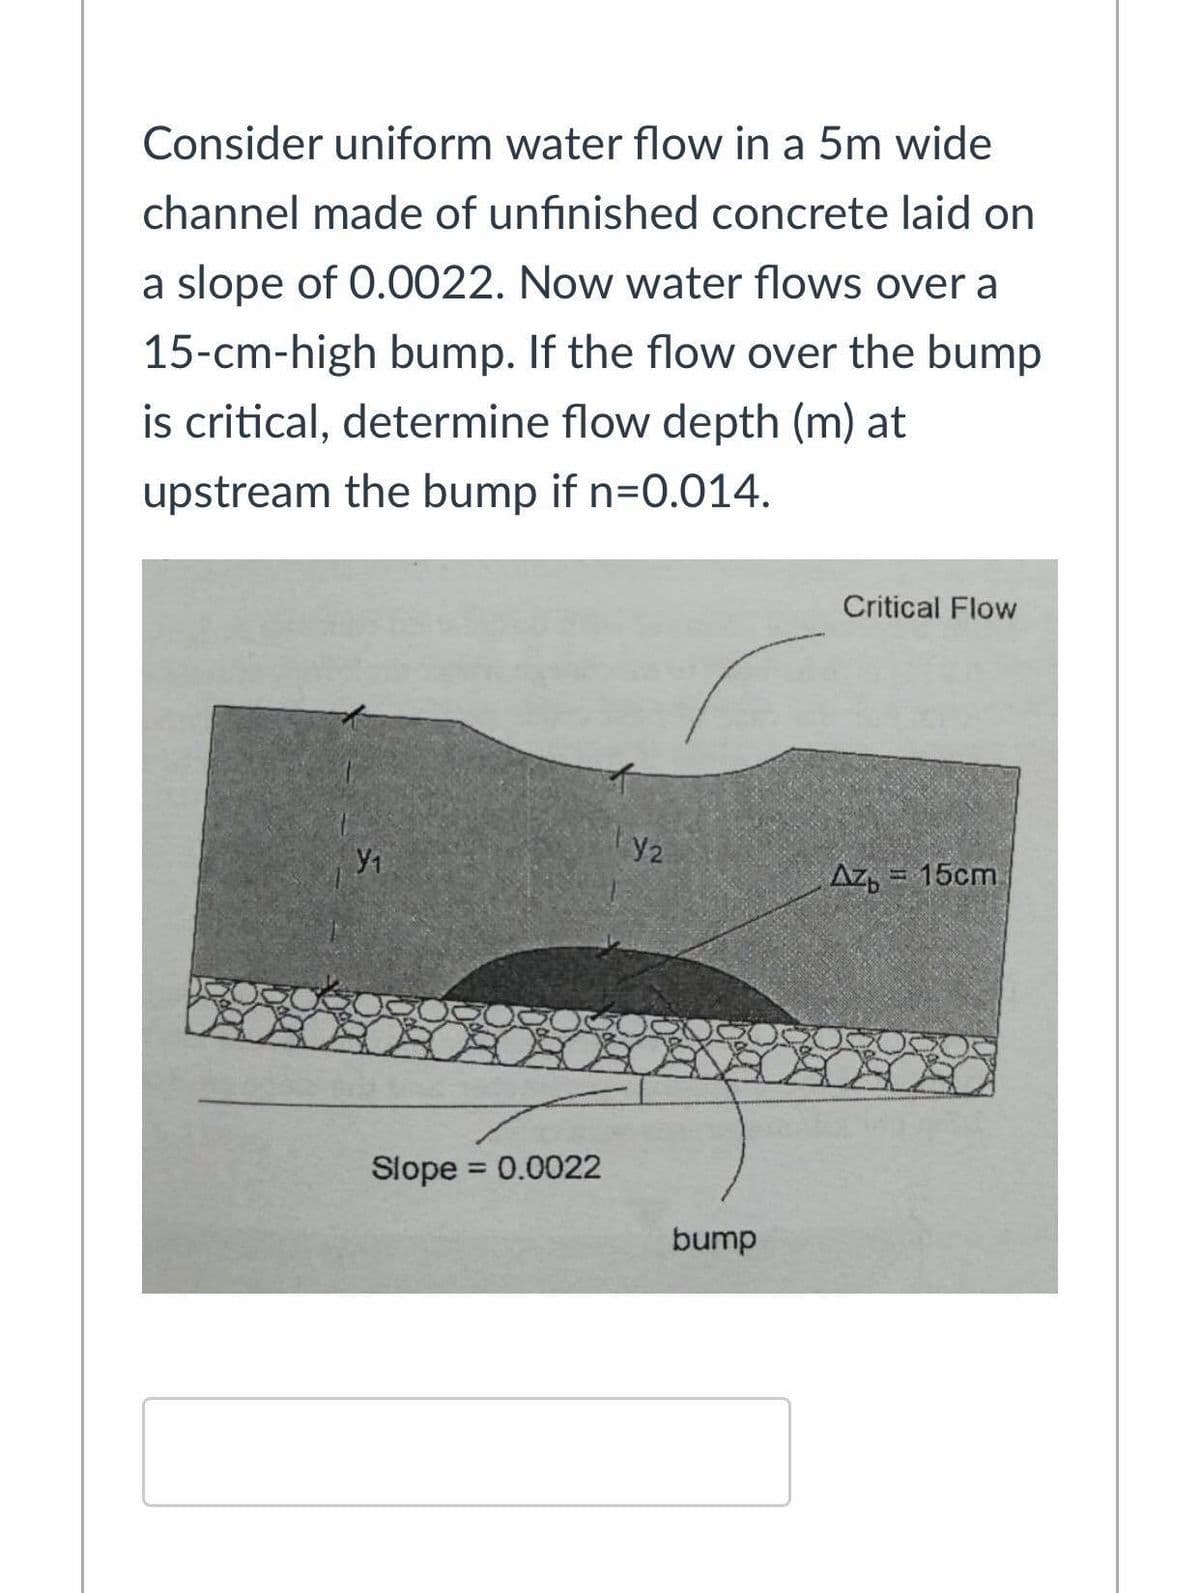 Consider uniform water flow in a 5m wide
channel made of unfinished concrete laid on
a slope of 0.0022. Now water flows over a
15-cm-high bump. If the flow over the bump
is critical, determine flow depth (m) at
upstream the bump if n=0.014.
Critical Flow
Az, = 15cm
Slope = 0.0022
%3D
bump
